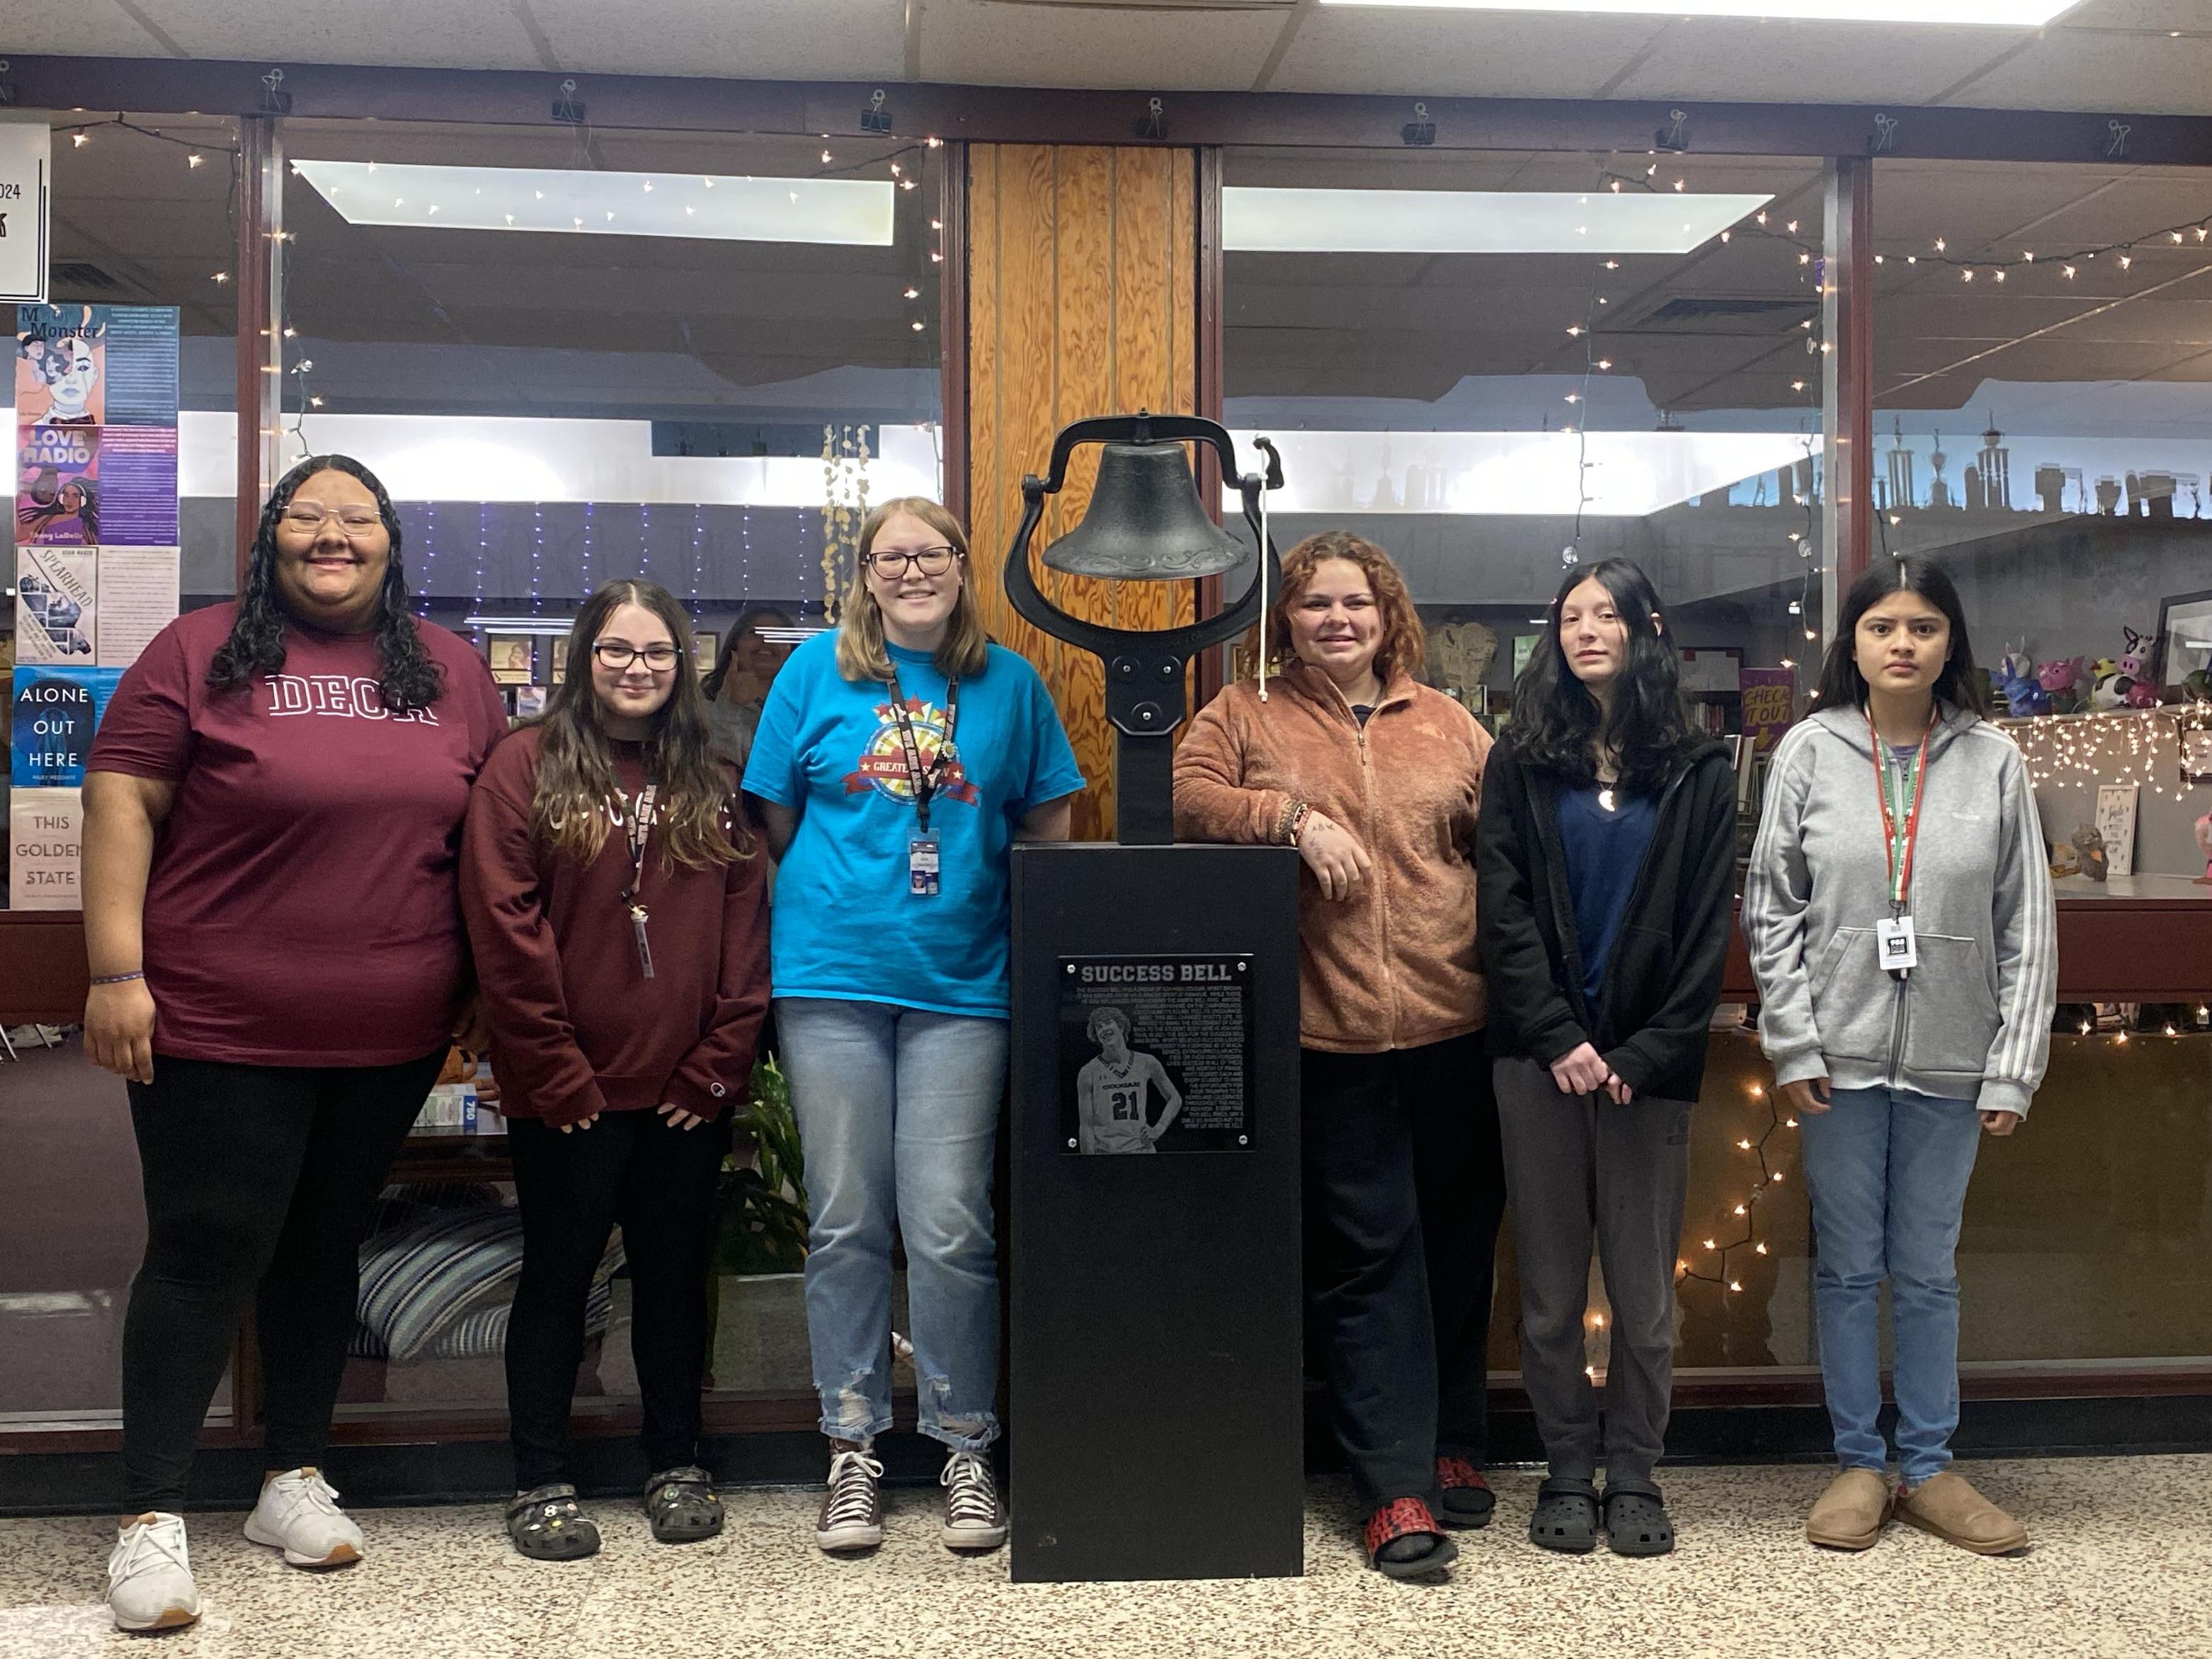 A H S students pose for the camera and success bell in the A H S student center